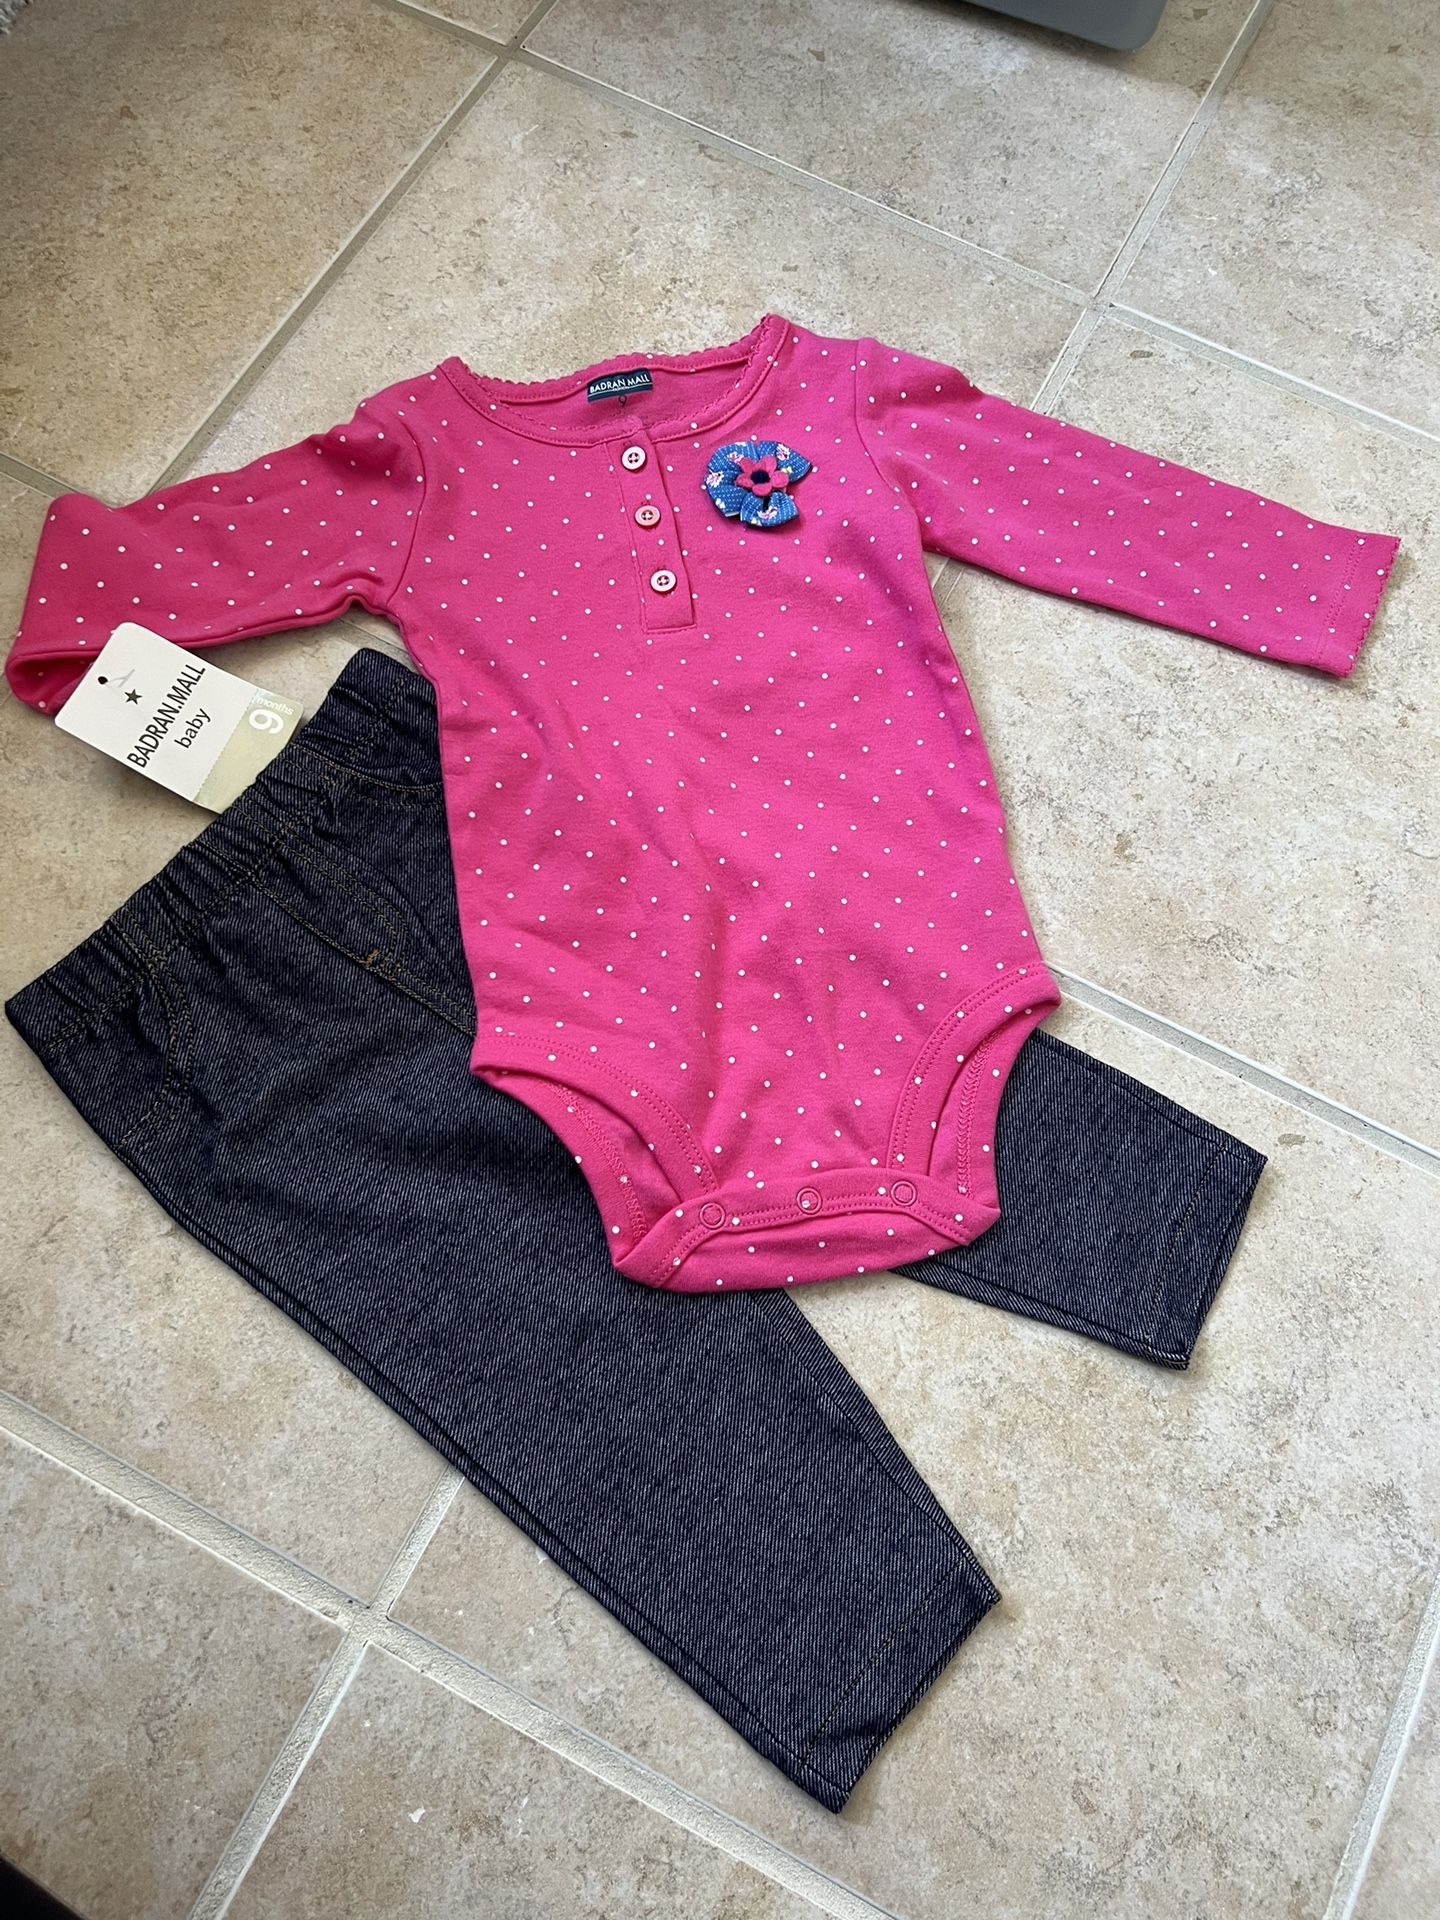 9 Months Girls Outfit 